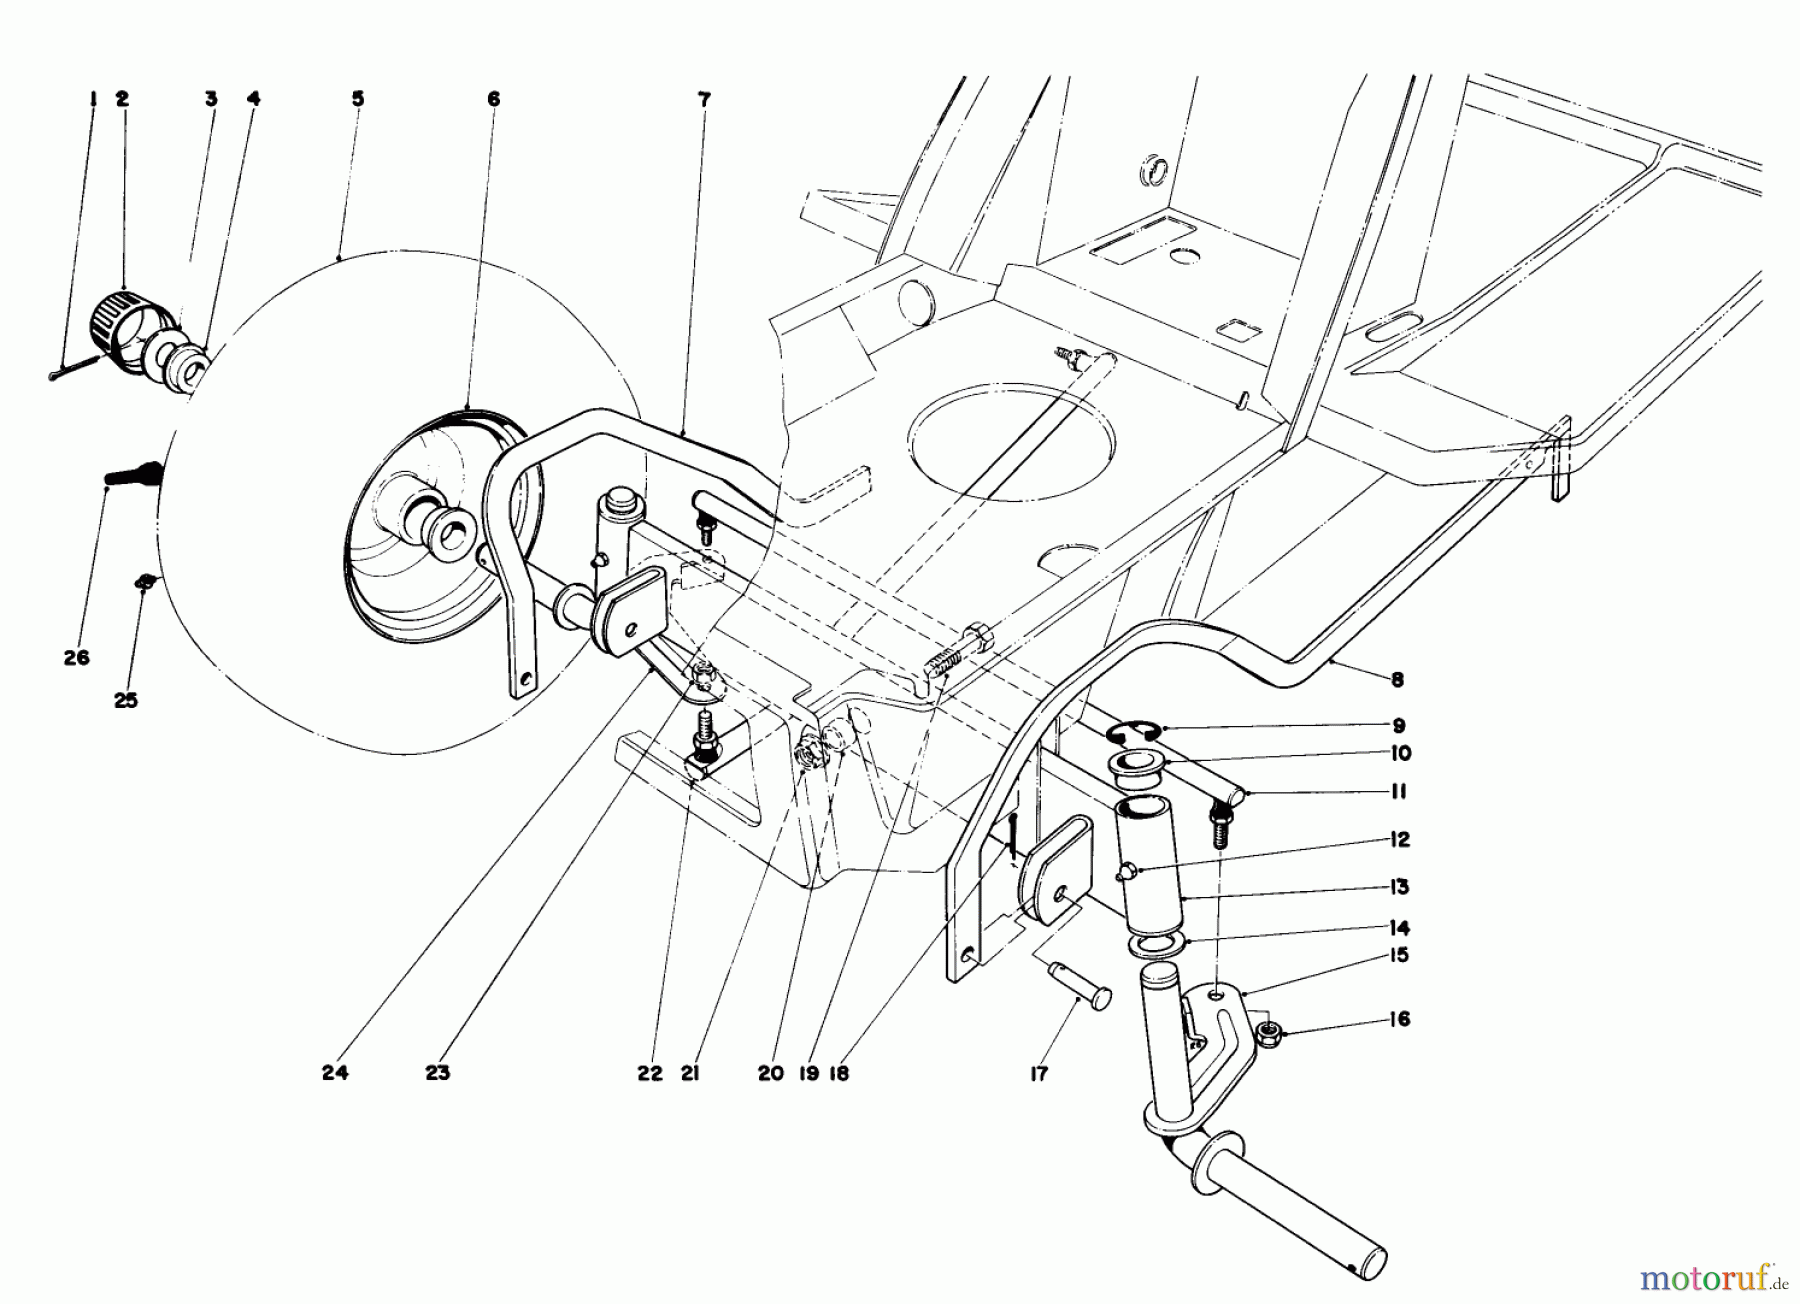  Toro Neu Mowers, Lawn & Garden Tractor Seite 1 57356 (11-42) - Toro 11-42 Lawn Tractor, 1981 (1000001-1999999) FRONT AXLE ASSEMBLY